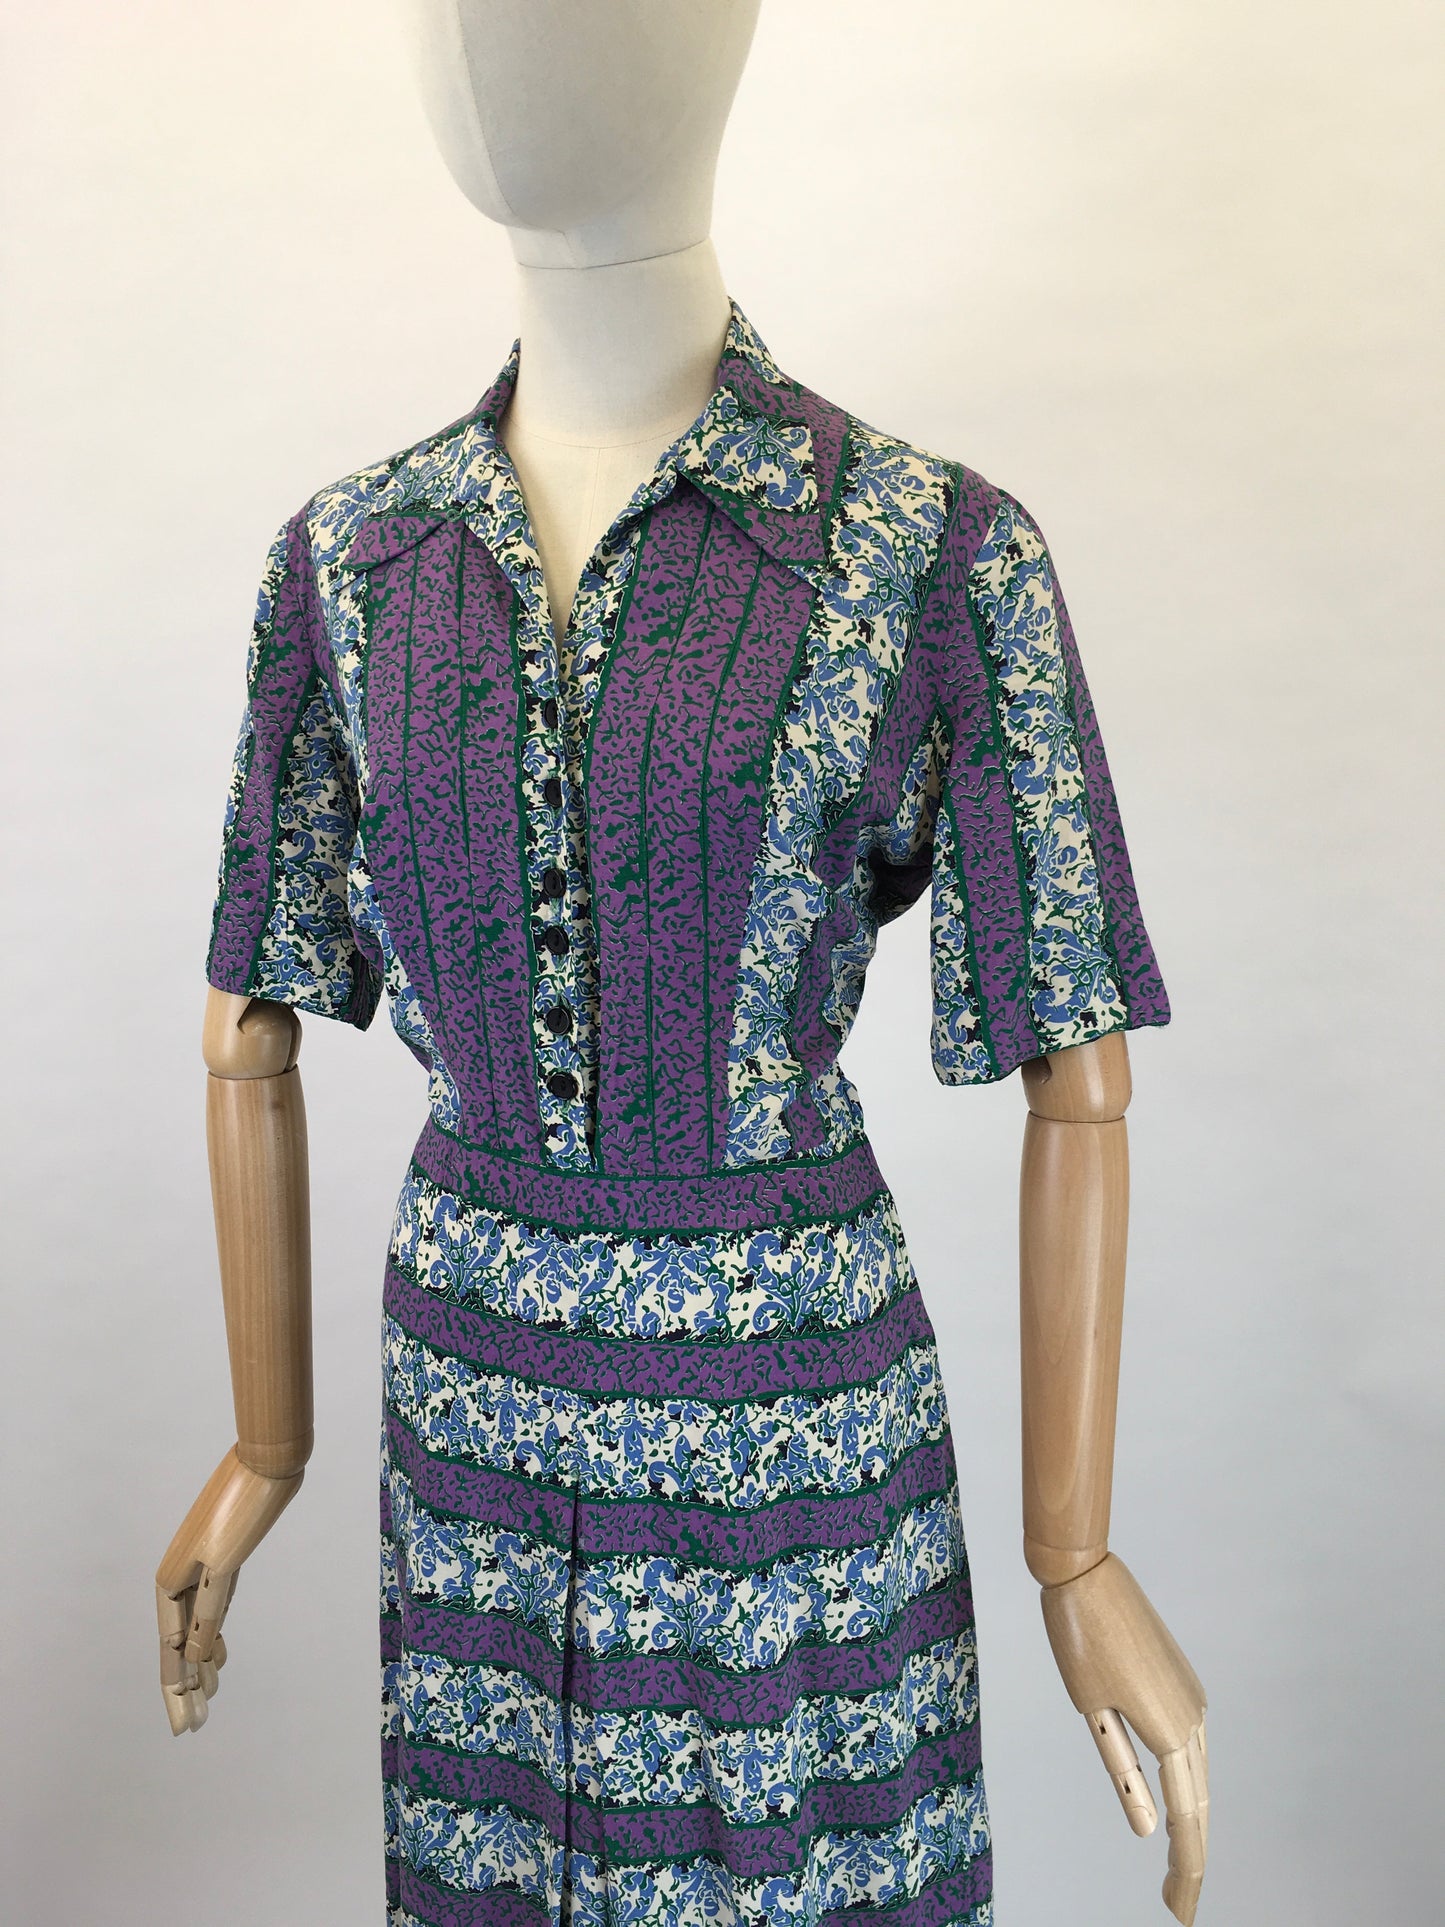 Original 1940s Rayon Dress - In Lovely Rich Purples, Greens and Whites with Florals and Stripes